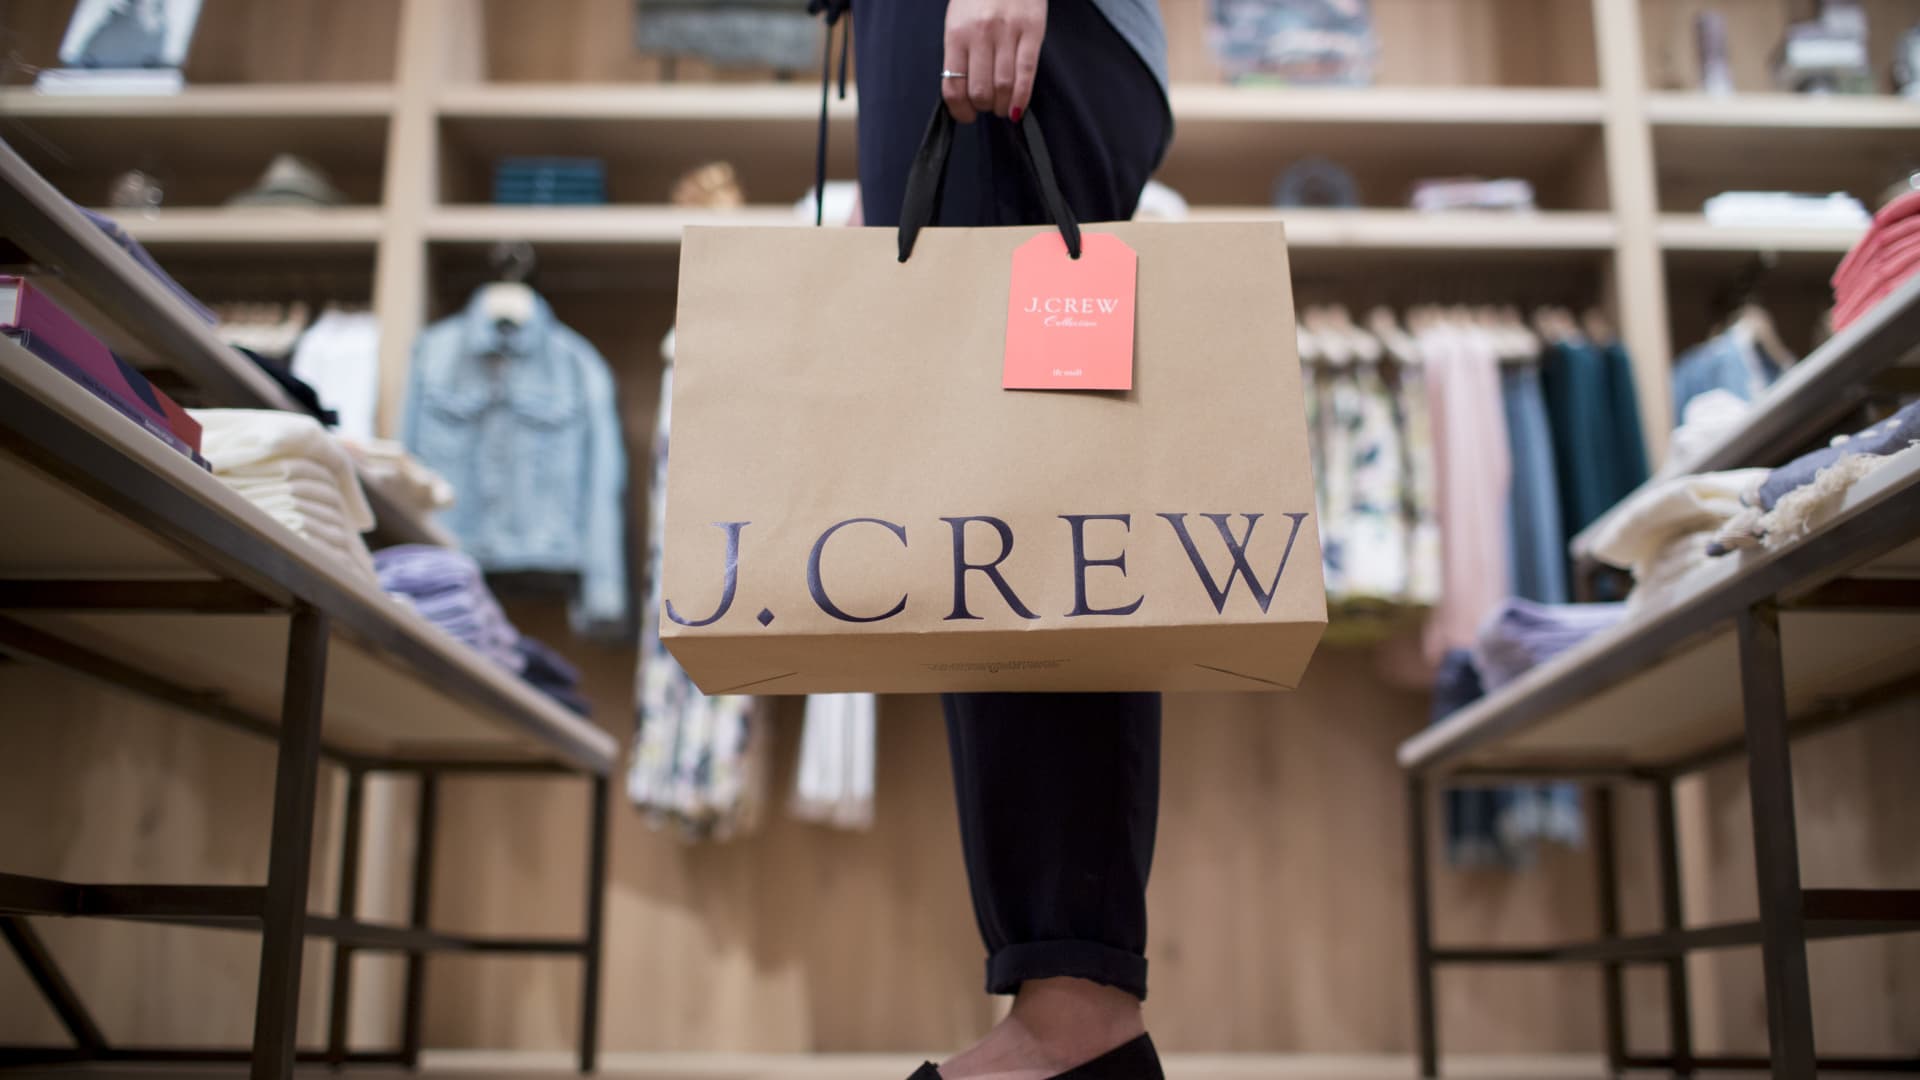 A women holding a bag poses for a photograph at J. Crew Group Inc.'s new women's store inside the International Finance Centre (IFC) mall in Hong Kong, China, on Thursday, May 22, 2014.